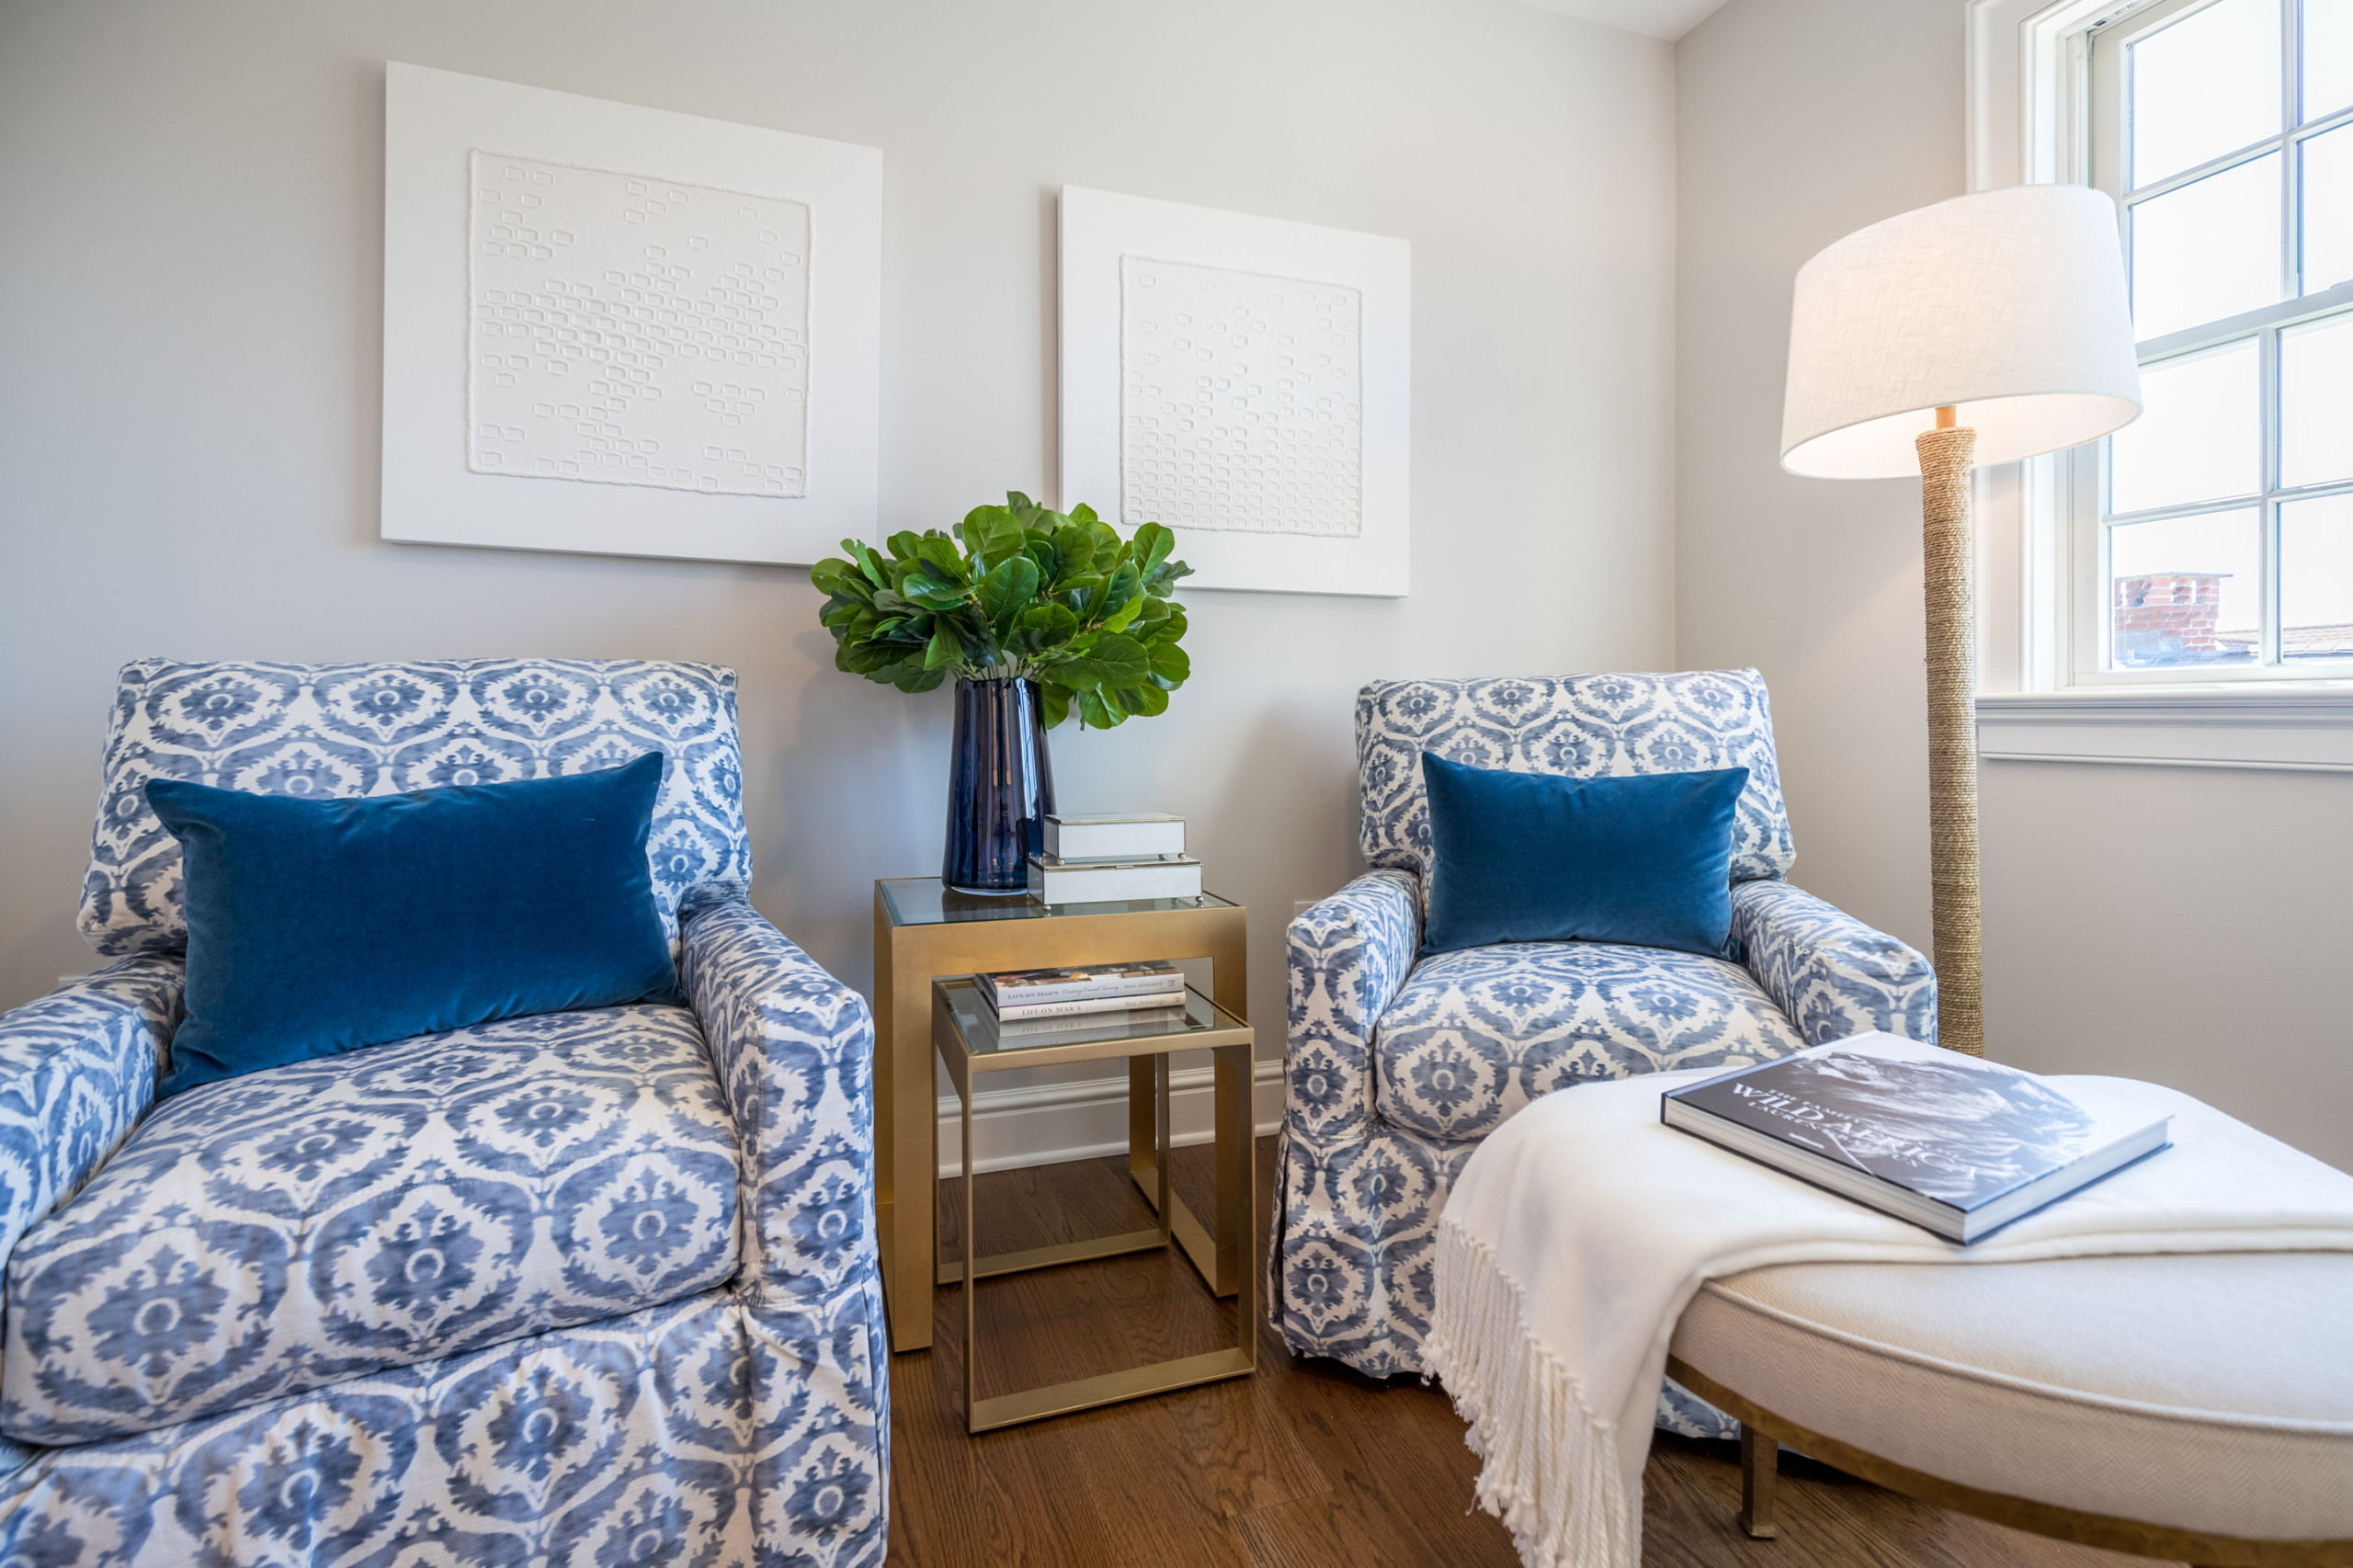 75 Beautiful Family Room Pictures Ideas April 2021 Houzz